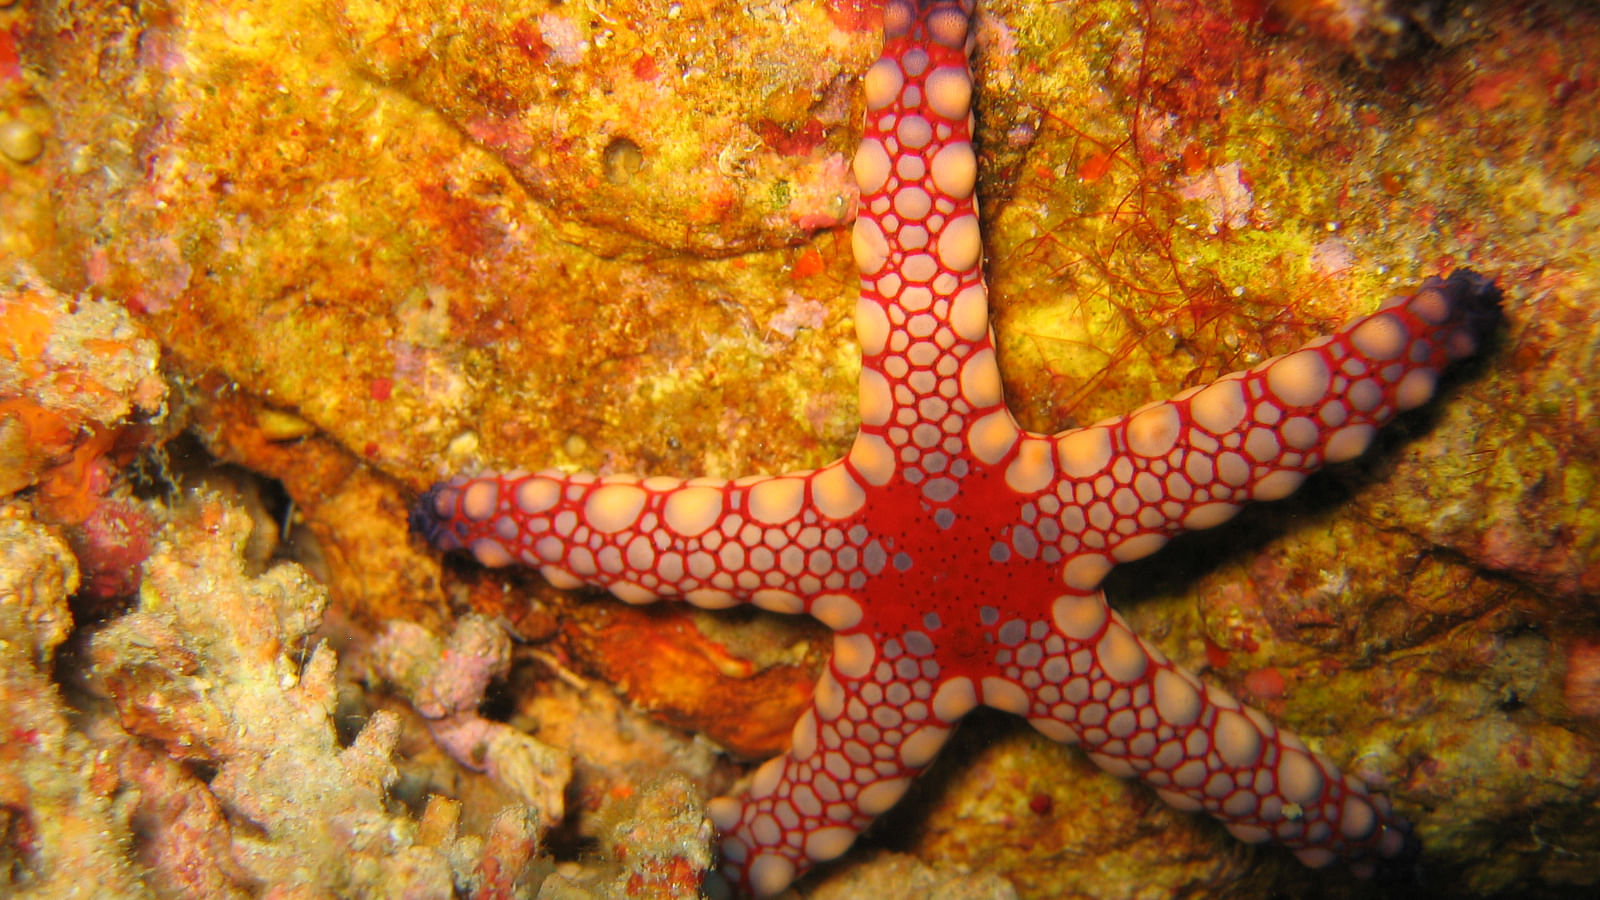 A starfish in the Andaman Island reefs (Photo Courtesy: Flickr/misssharongray)